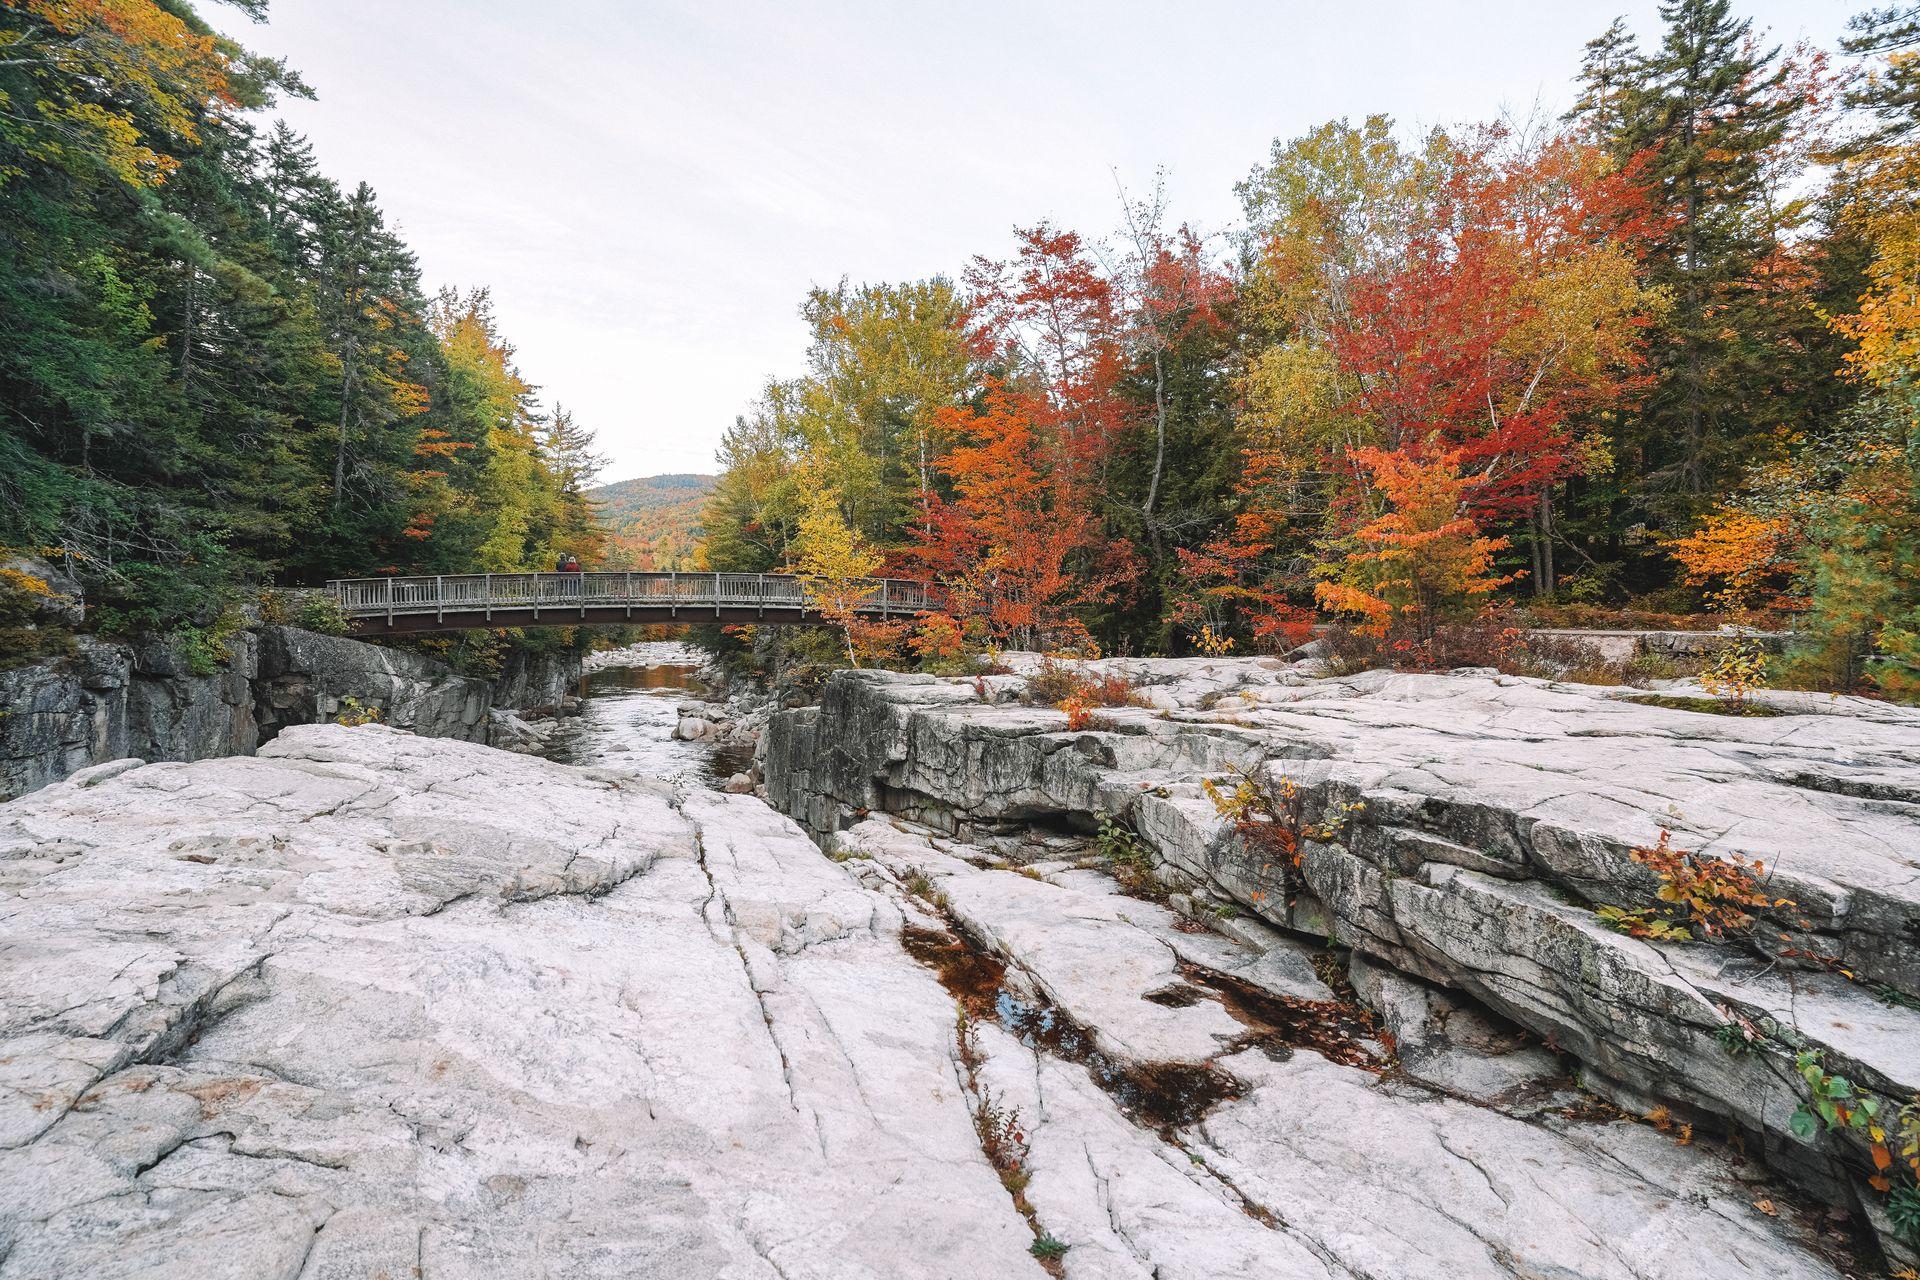 A gorge area with a bridge that is surrounded by colorful trees and fall foliage.